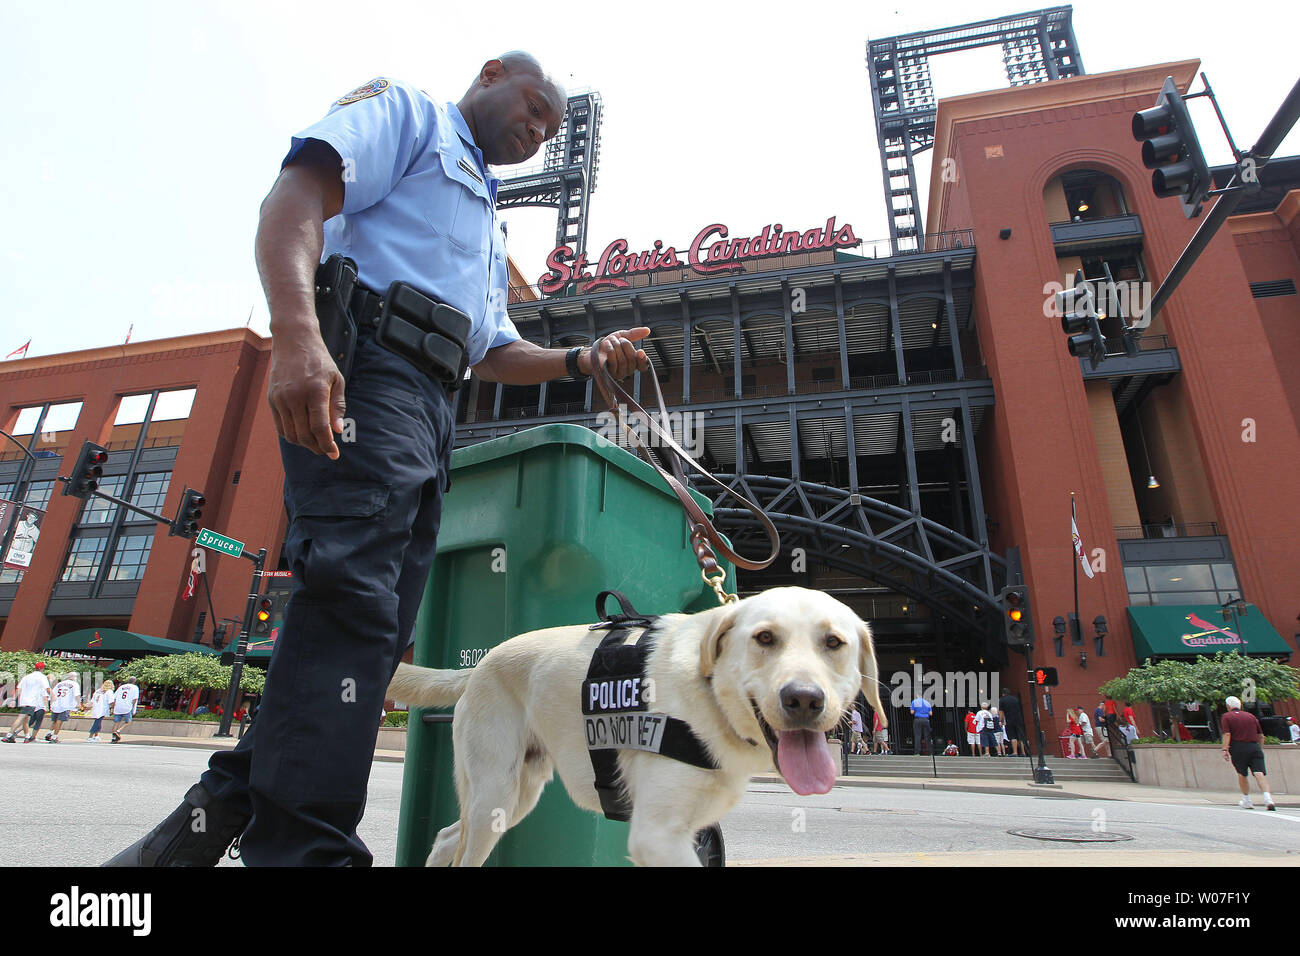 St. Louis K-9 police officer Everette Culberson walks his new dog Upshaw, a two and a half year old white lab puppy around Busch Stadium before the Los Angeles Dodgers - St. Louis Cardinals baseball game in St. Louis on July 19, 2014. Upshaw is one of two puppies the Cardinals have bought and donated for vapor-wake detection around the ballpark.  The Cardinals are the first professional sports team to have made this kind of purchase for security purposes.  UPI/Bill Greenblatt Stock Photo